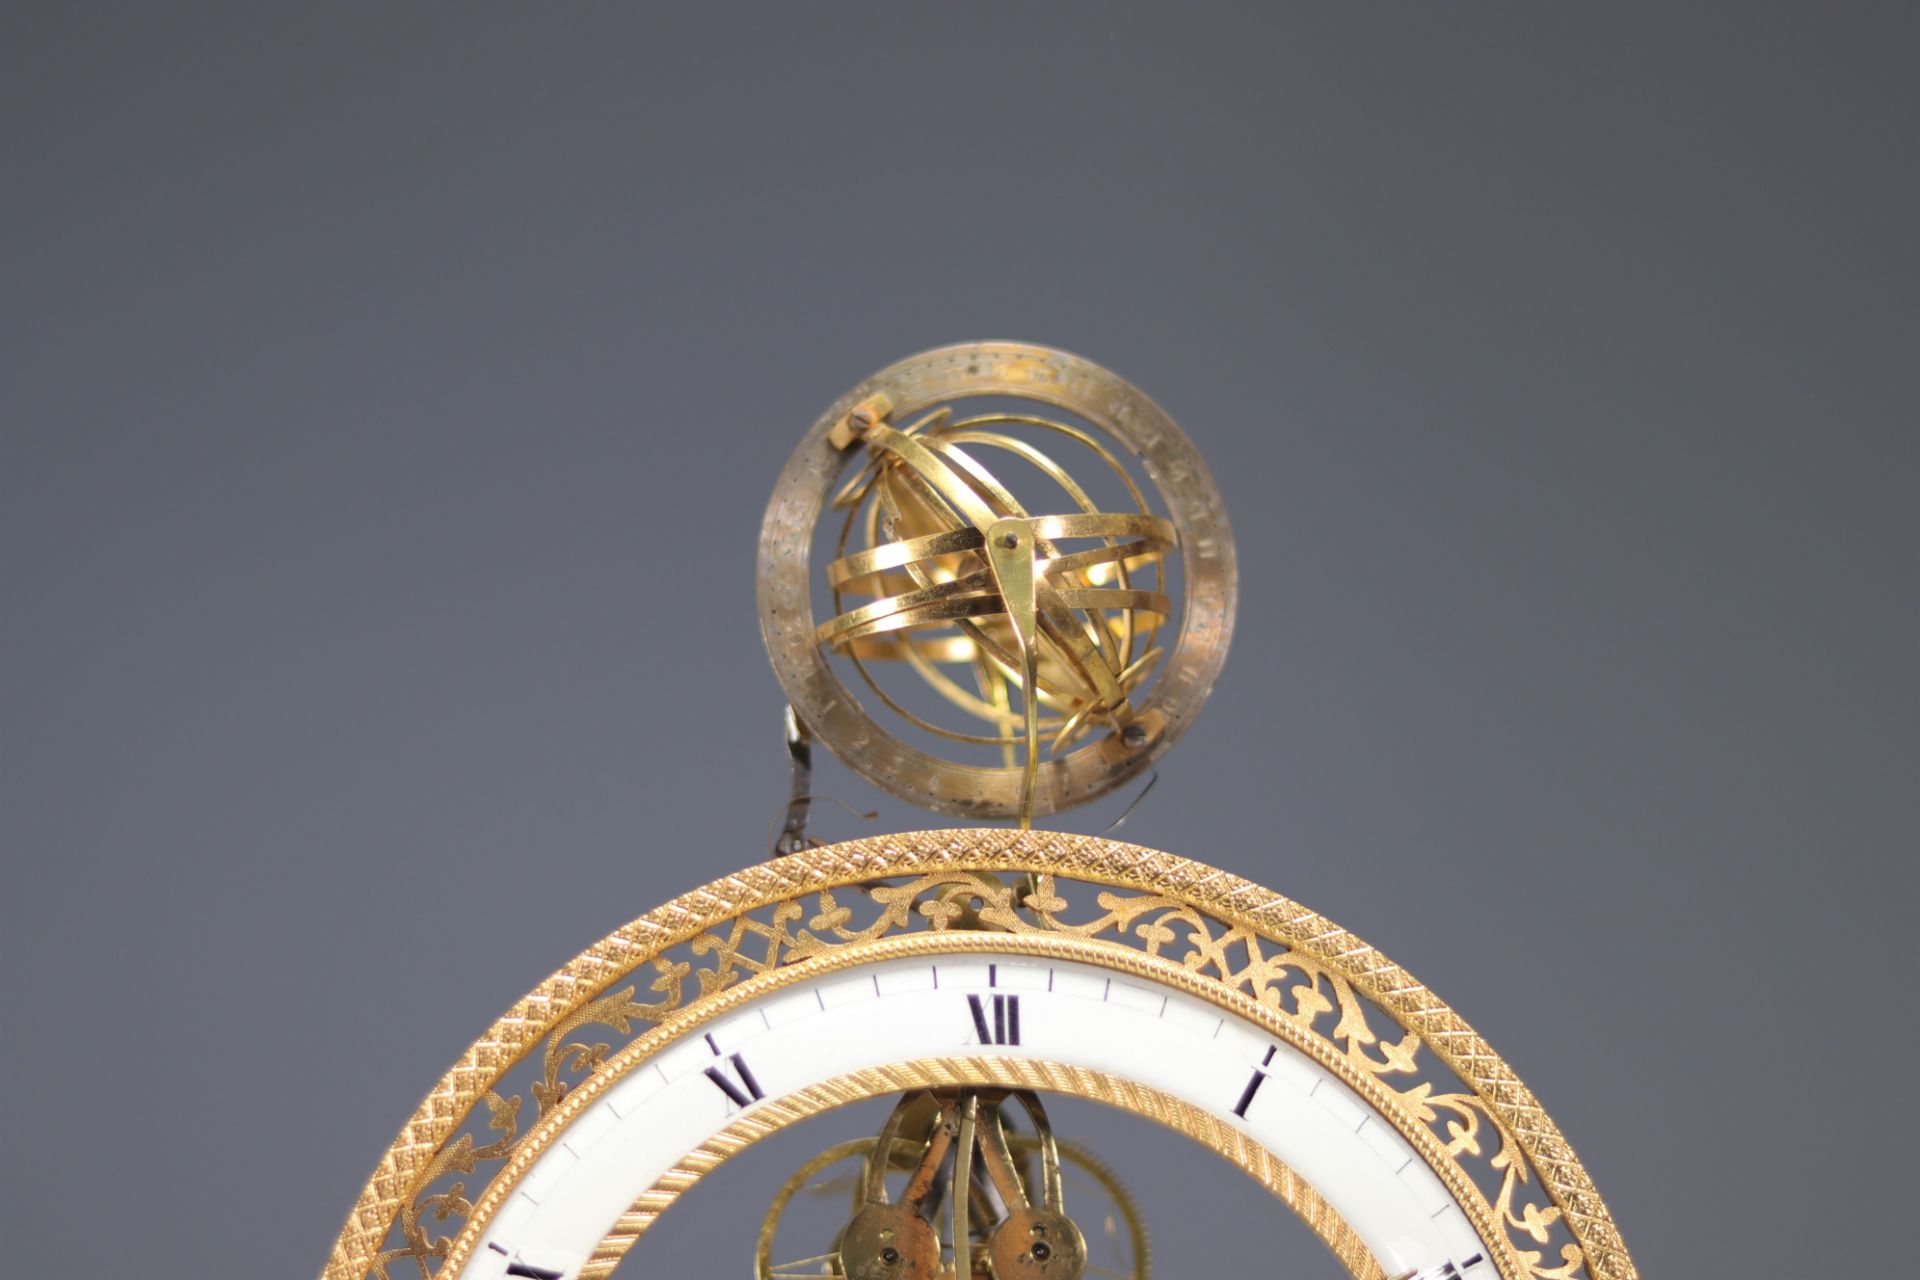 Rare skeleton clock with movement of the stars signed Aerts in Tongres - Image 6 of 8